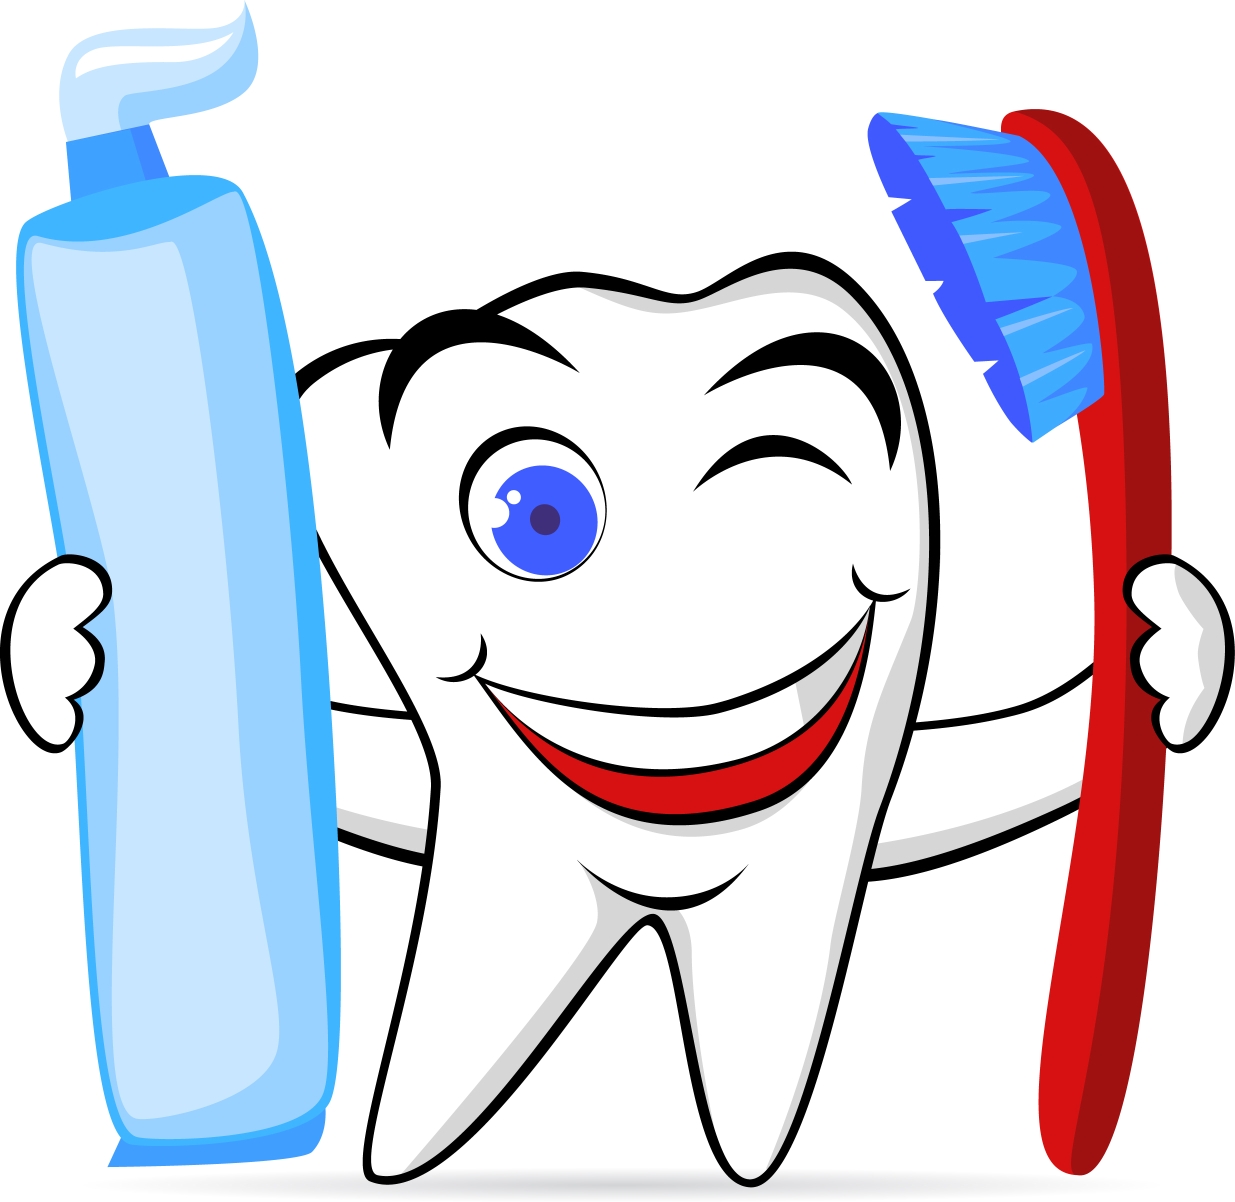 Dental Images About Dentist On Teeth Ache Clipart